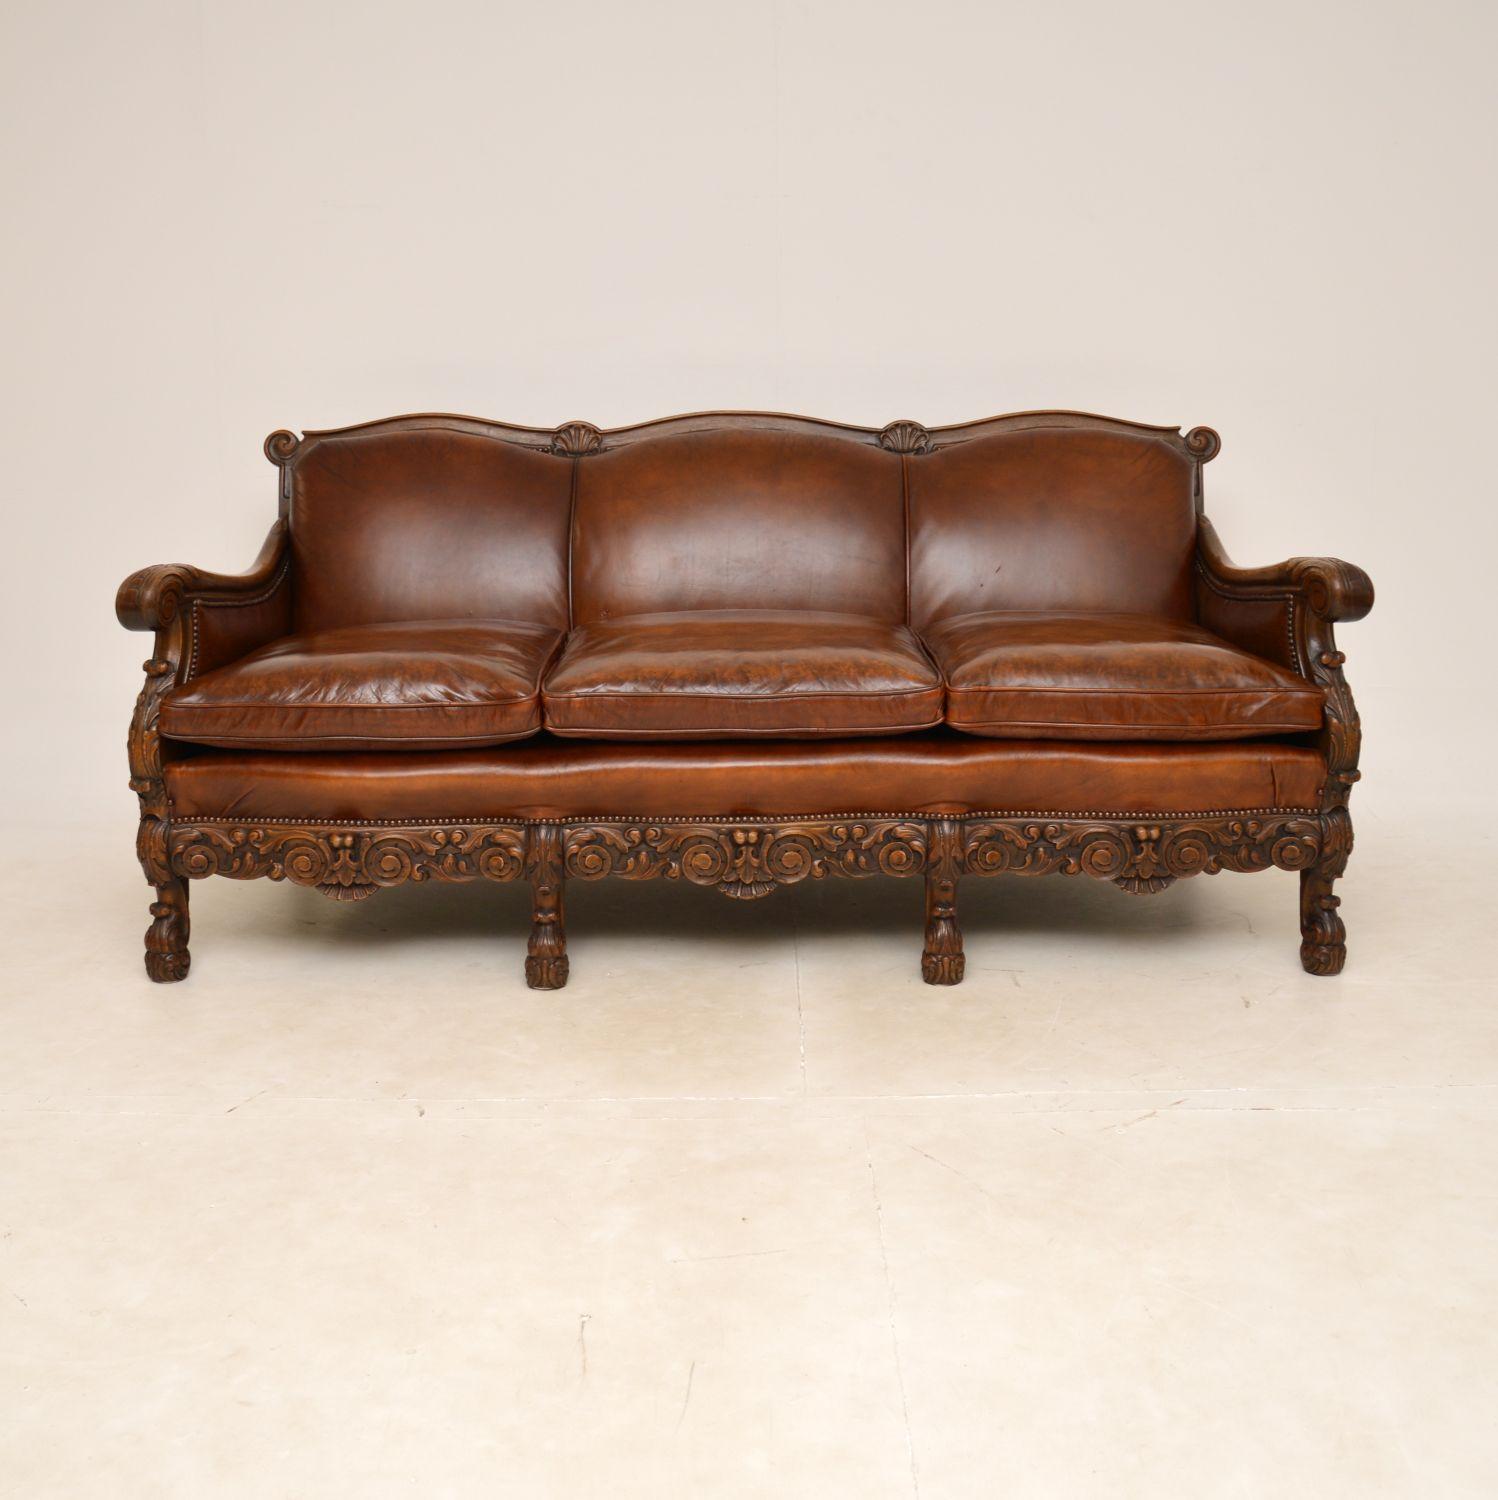 A stunning antique Swedish bergere sofa in leather and carved oak. This was recently imported from Sweden, it dates from around the 1900-1910 period.

The quality is outstanding, the solid oak frame has beautifully intricate and crisp carving